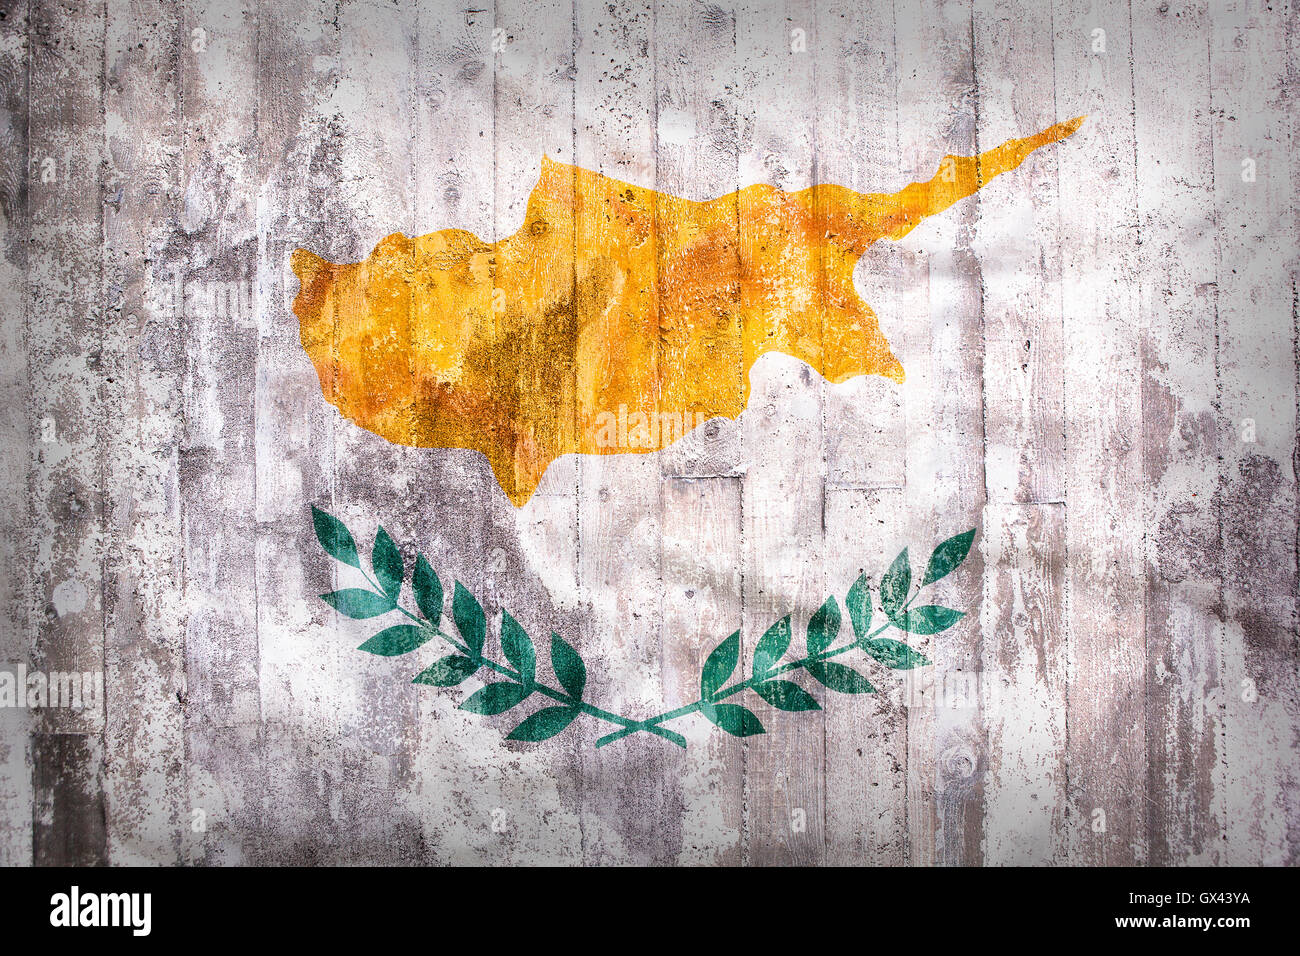 Grunge style of Cyprus flag on a brick wall for background Stock Photo